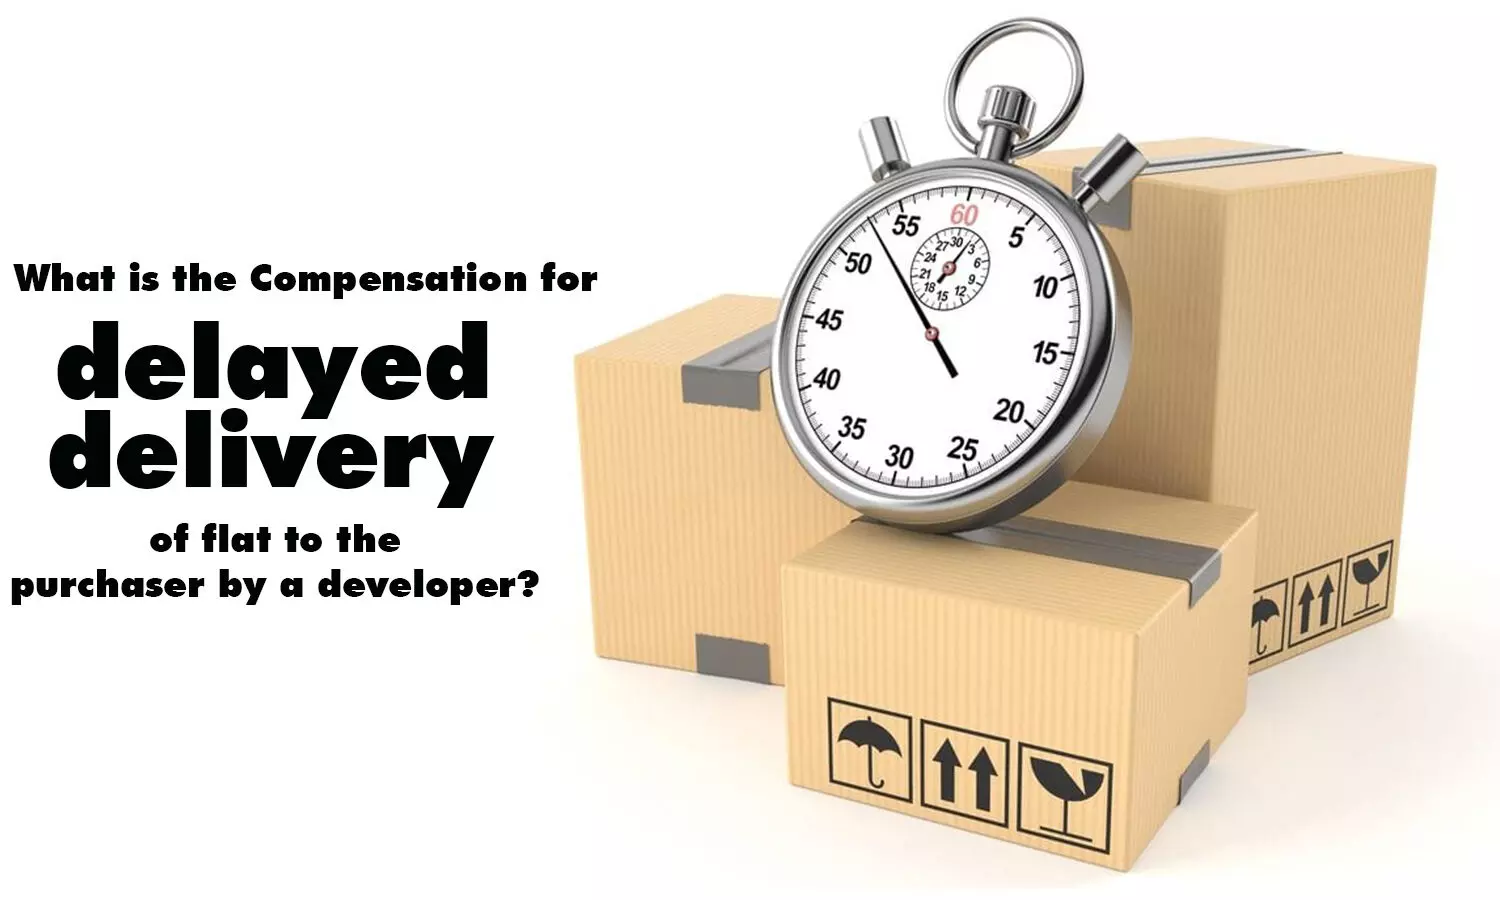 What is the Compensation for delayed delivery of flat to the purchaser by a developer?